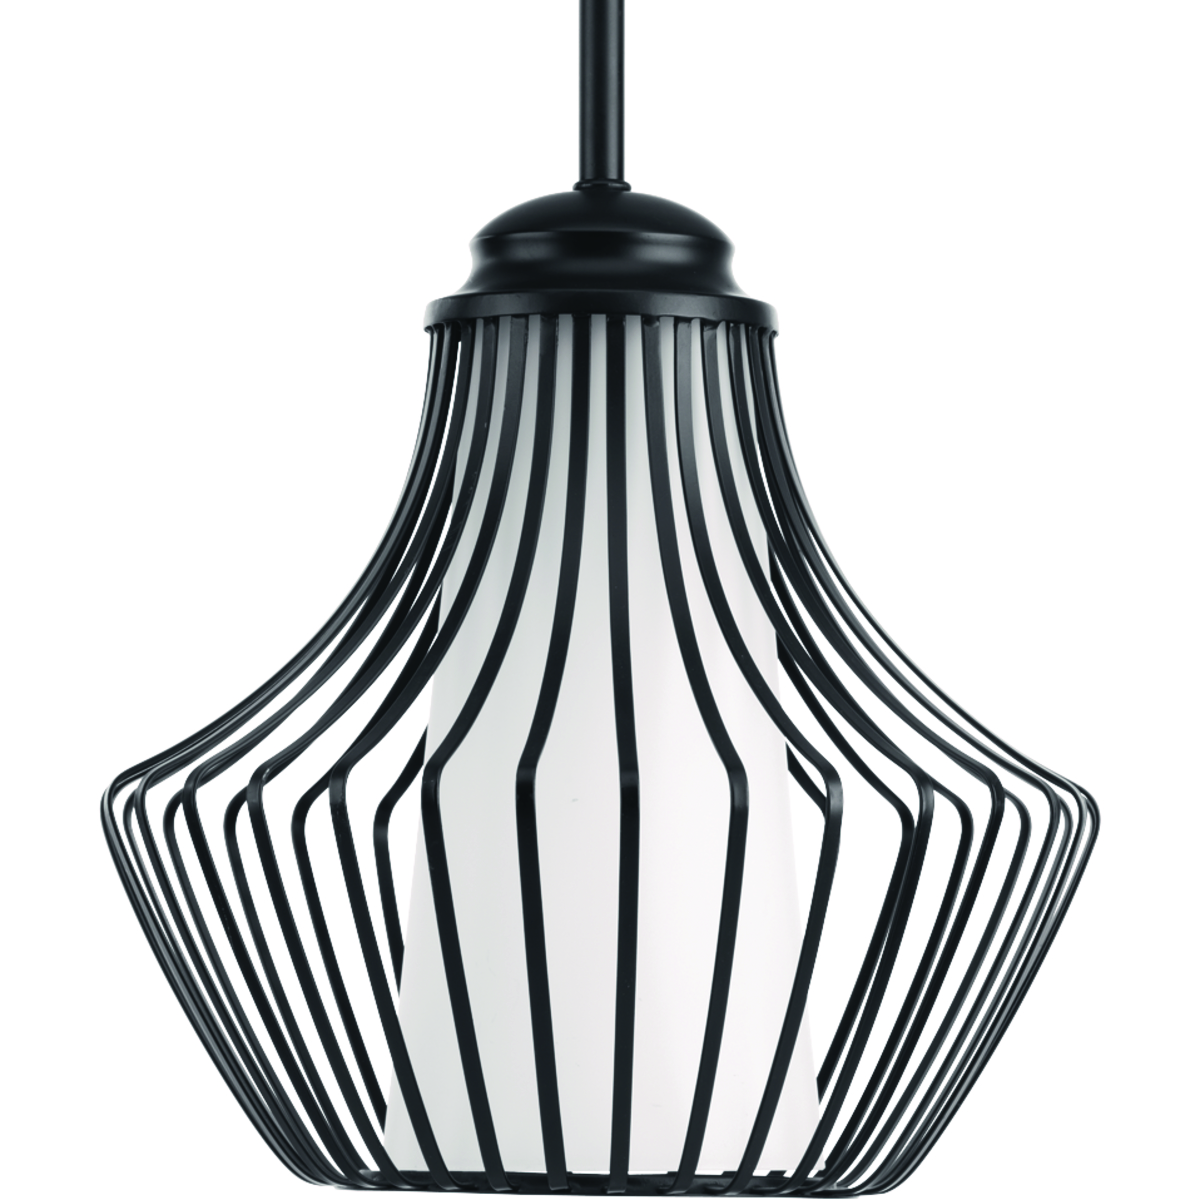 The one-light pendant from the Finn collection takes a new perspective on an open cage design. The beautifully graphic frame in a matte Black finish wraps around an etched white glass shade creating a focal aperture for a single bulb. Black finish.